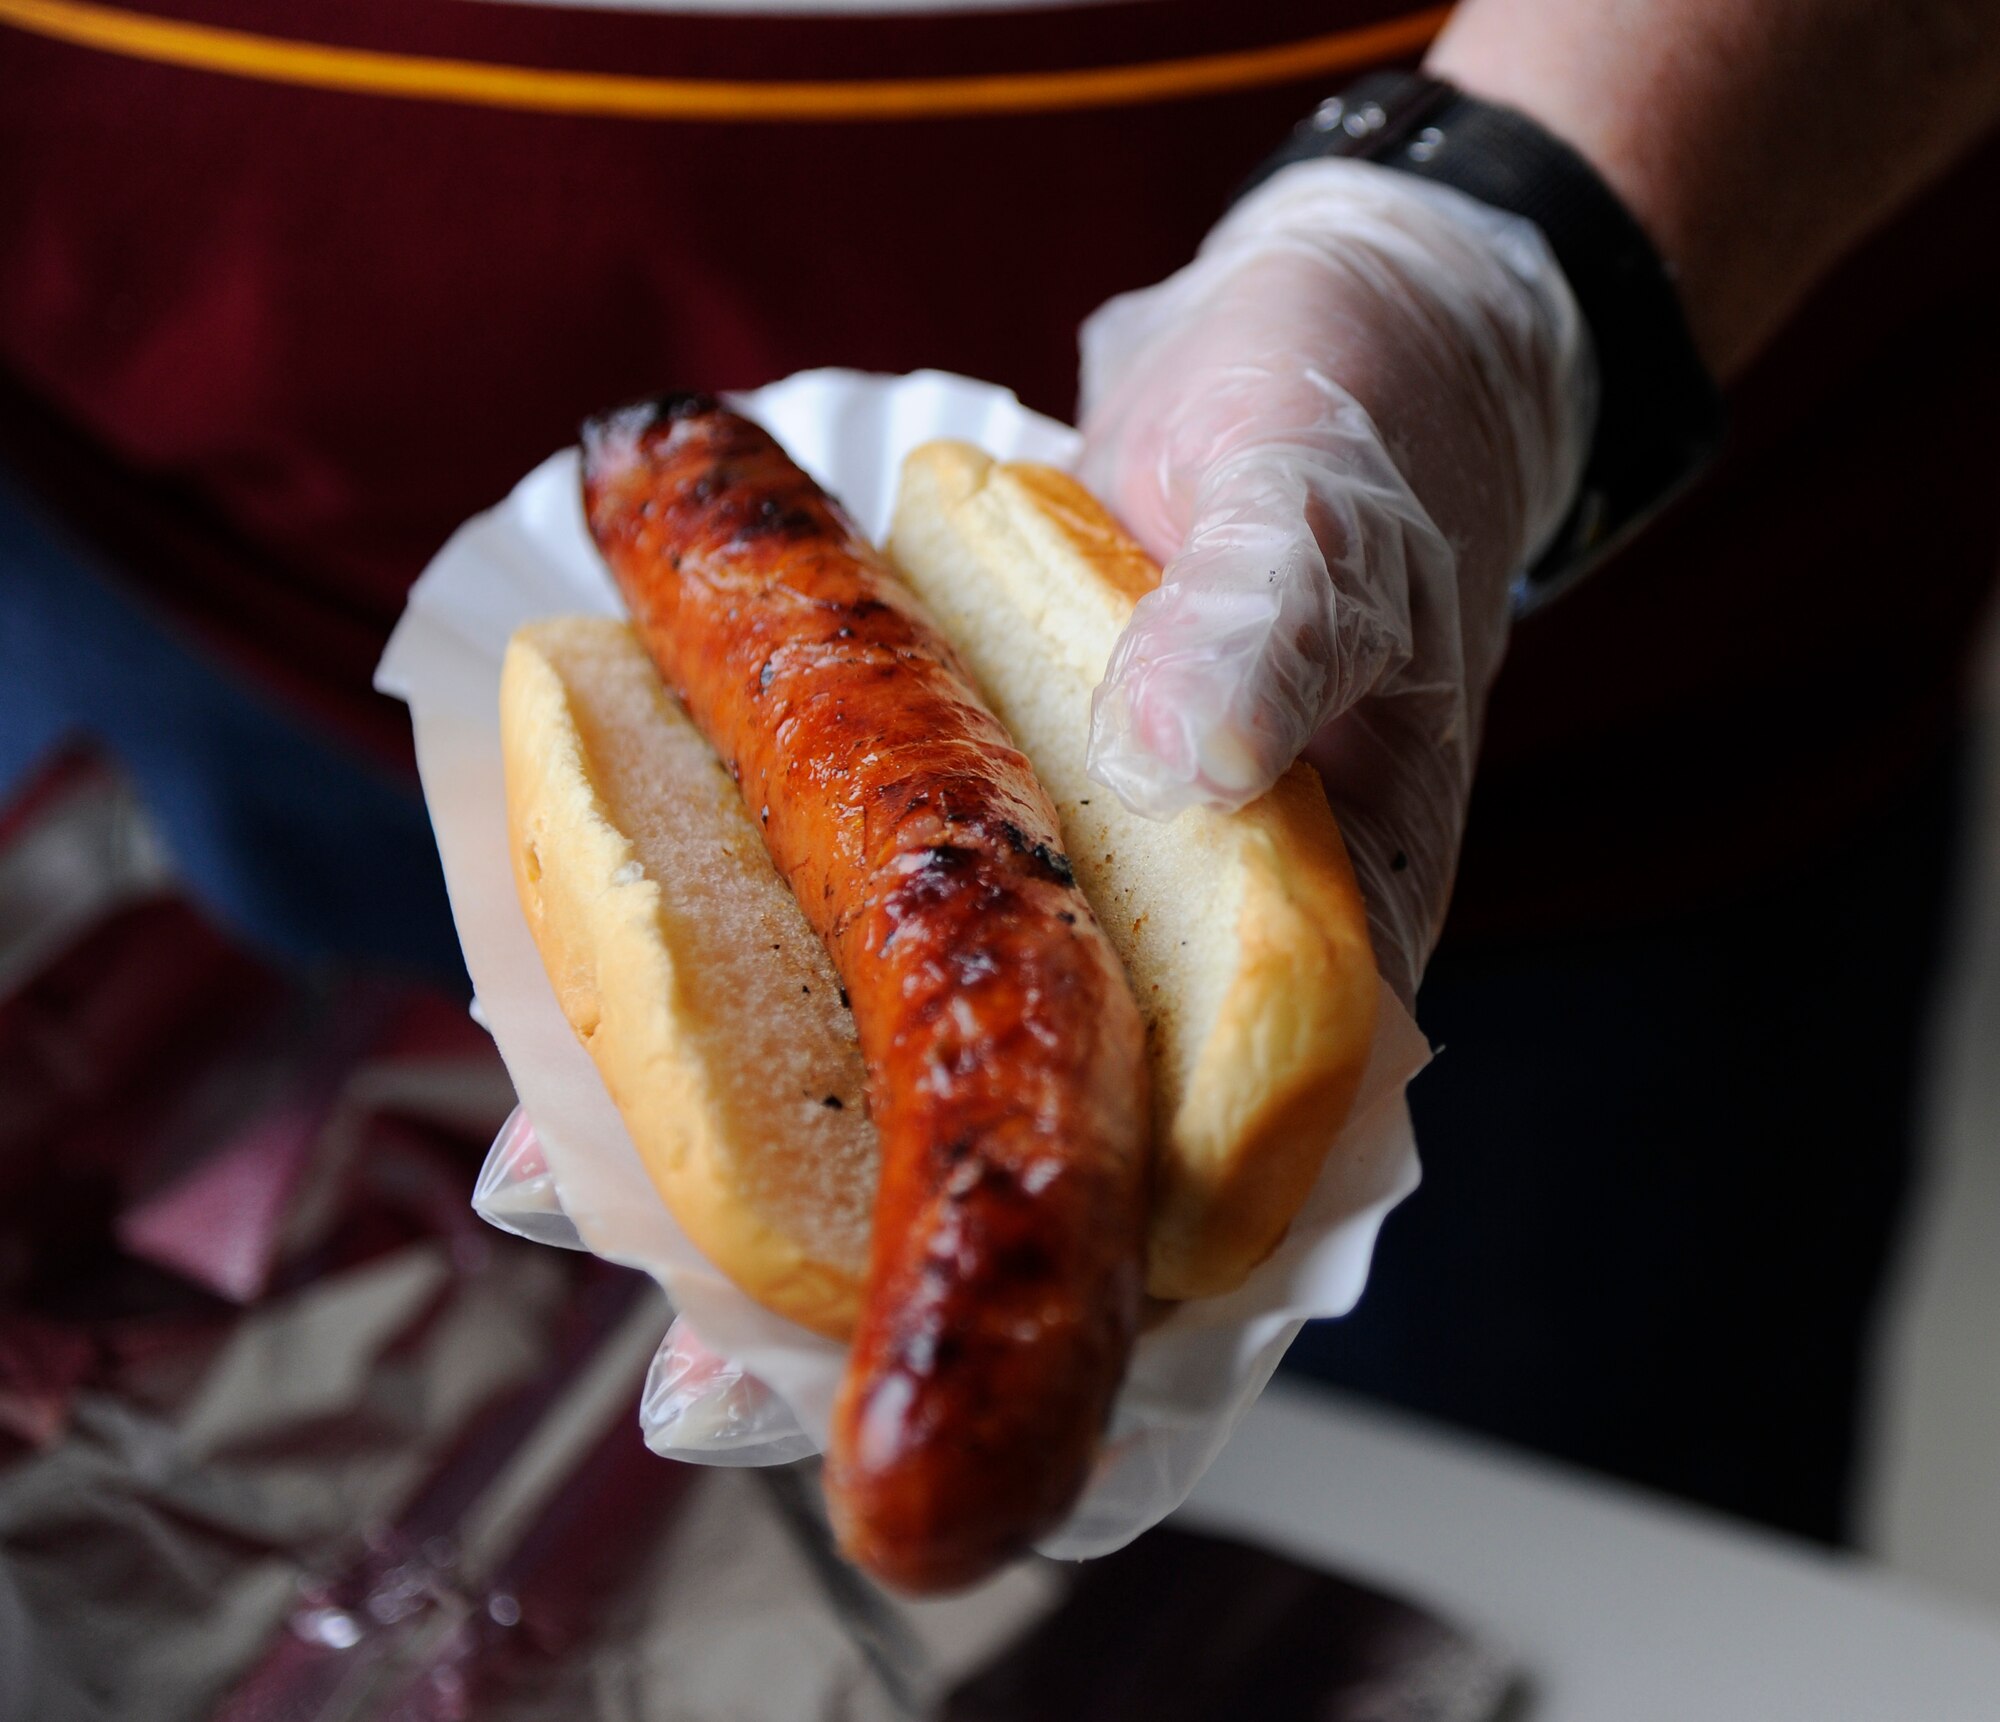 A “Fred Stokes Sausage” is prepared for a customer during Retiree Appreciation Day at the Base Exchange on Hurlburt Field, Fla., Sept. 25, 2014. The event included various activities, such as free blood pressure checks, sidewalk sales, and a meet and greet with former NFL player Fred Stokes. (U.S. Air Force photo/Staff Sgt. Sarah Hanson)